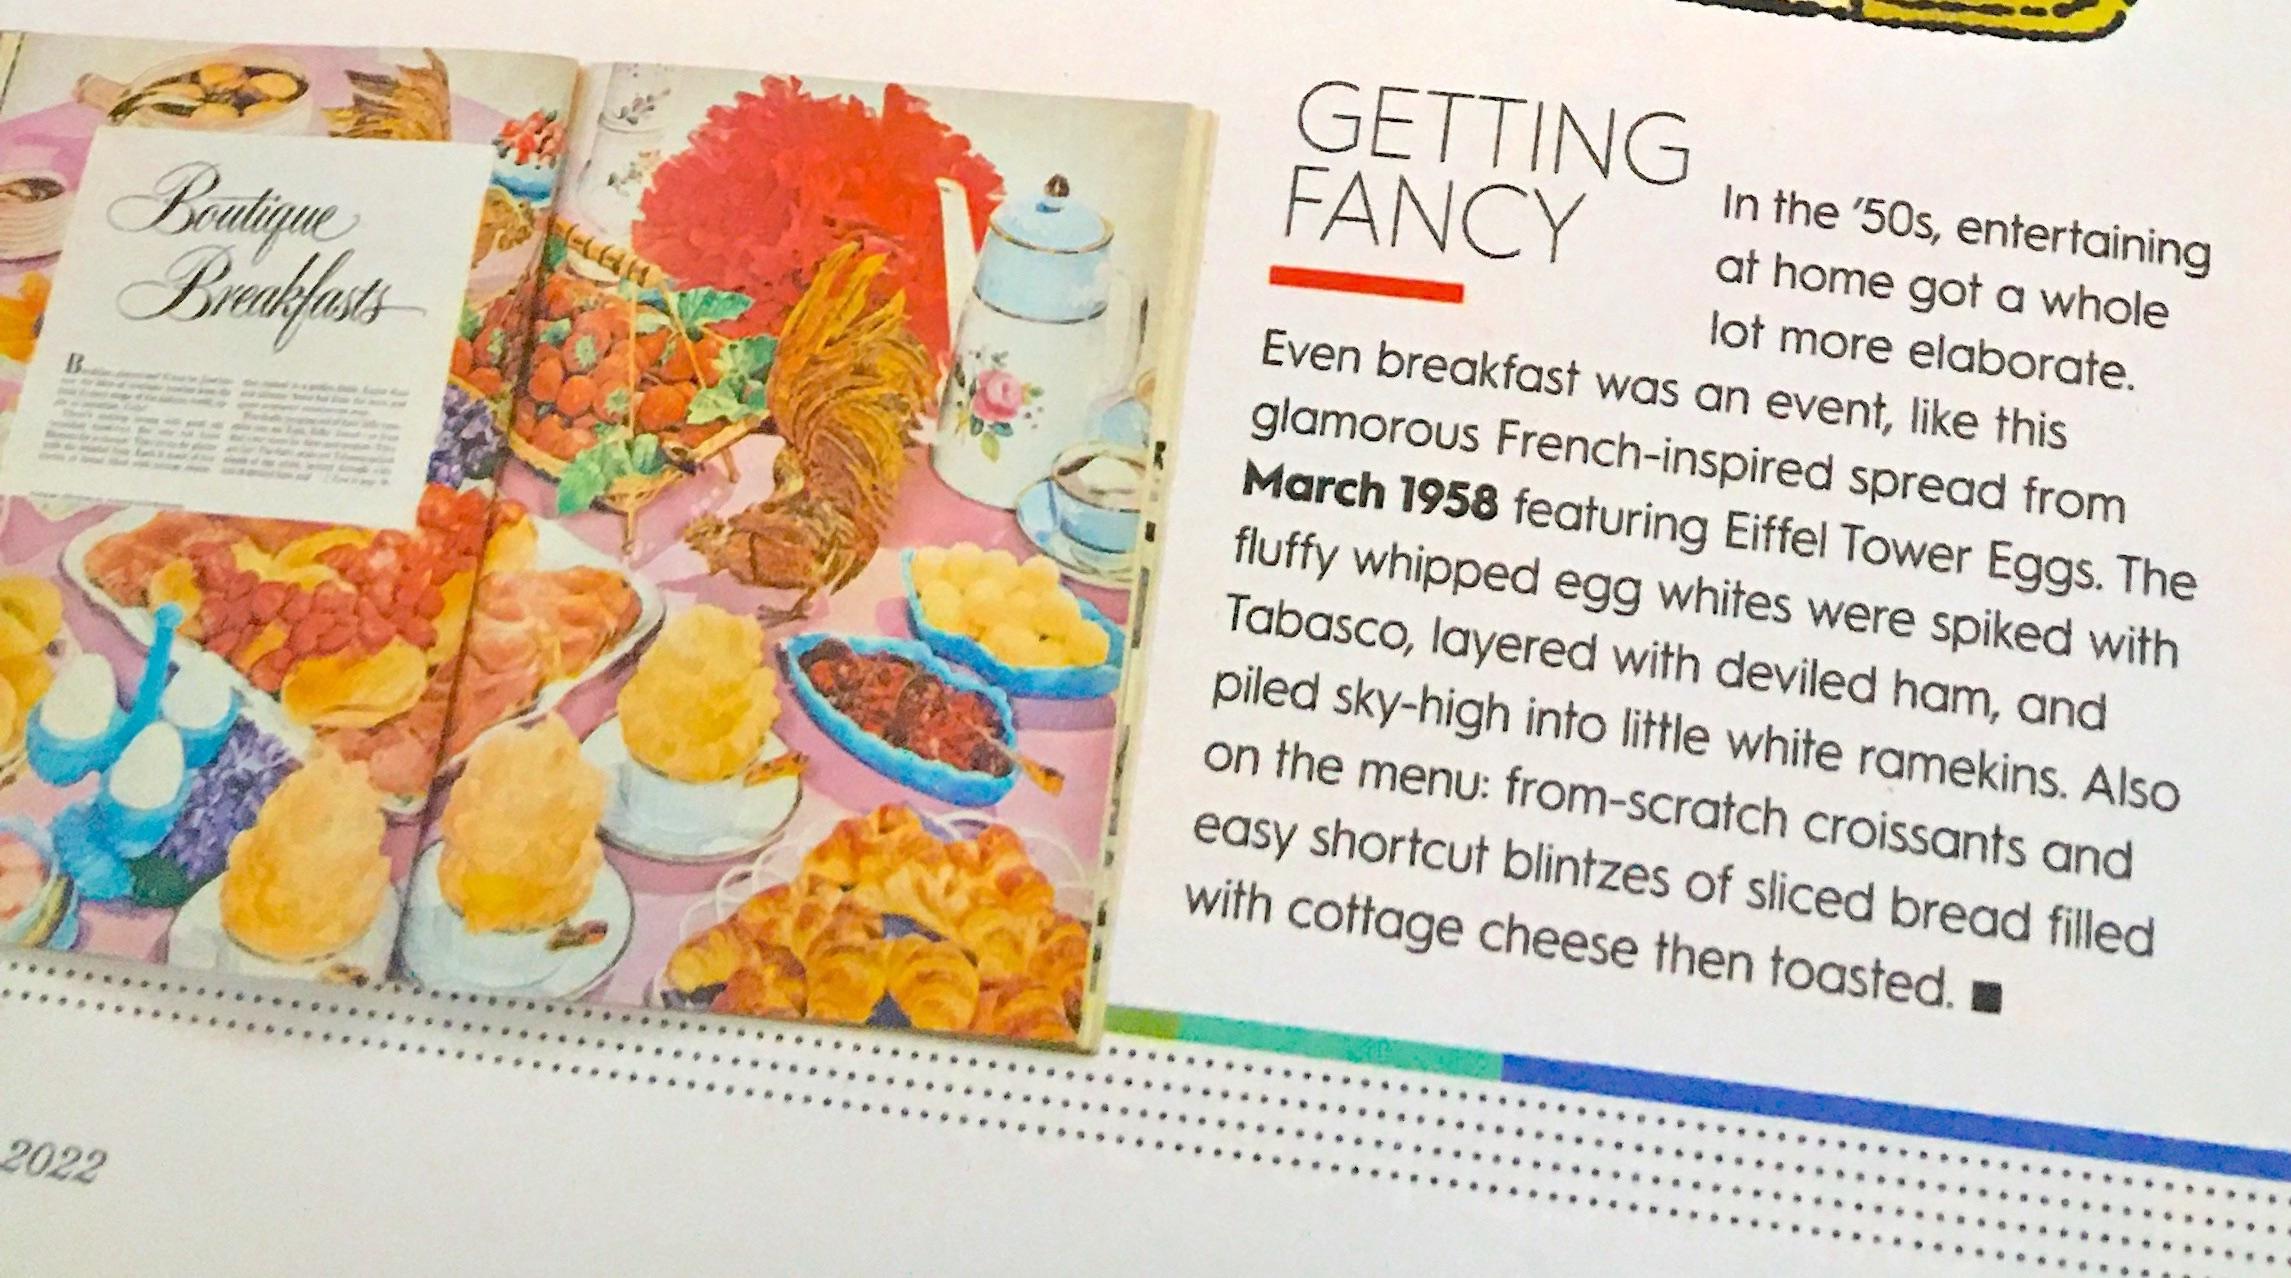 Better Homes and Gardens Breakfast Trends Then and Now - Getting Fancy - Eiffel Tower Eggs Recipe from March 1958